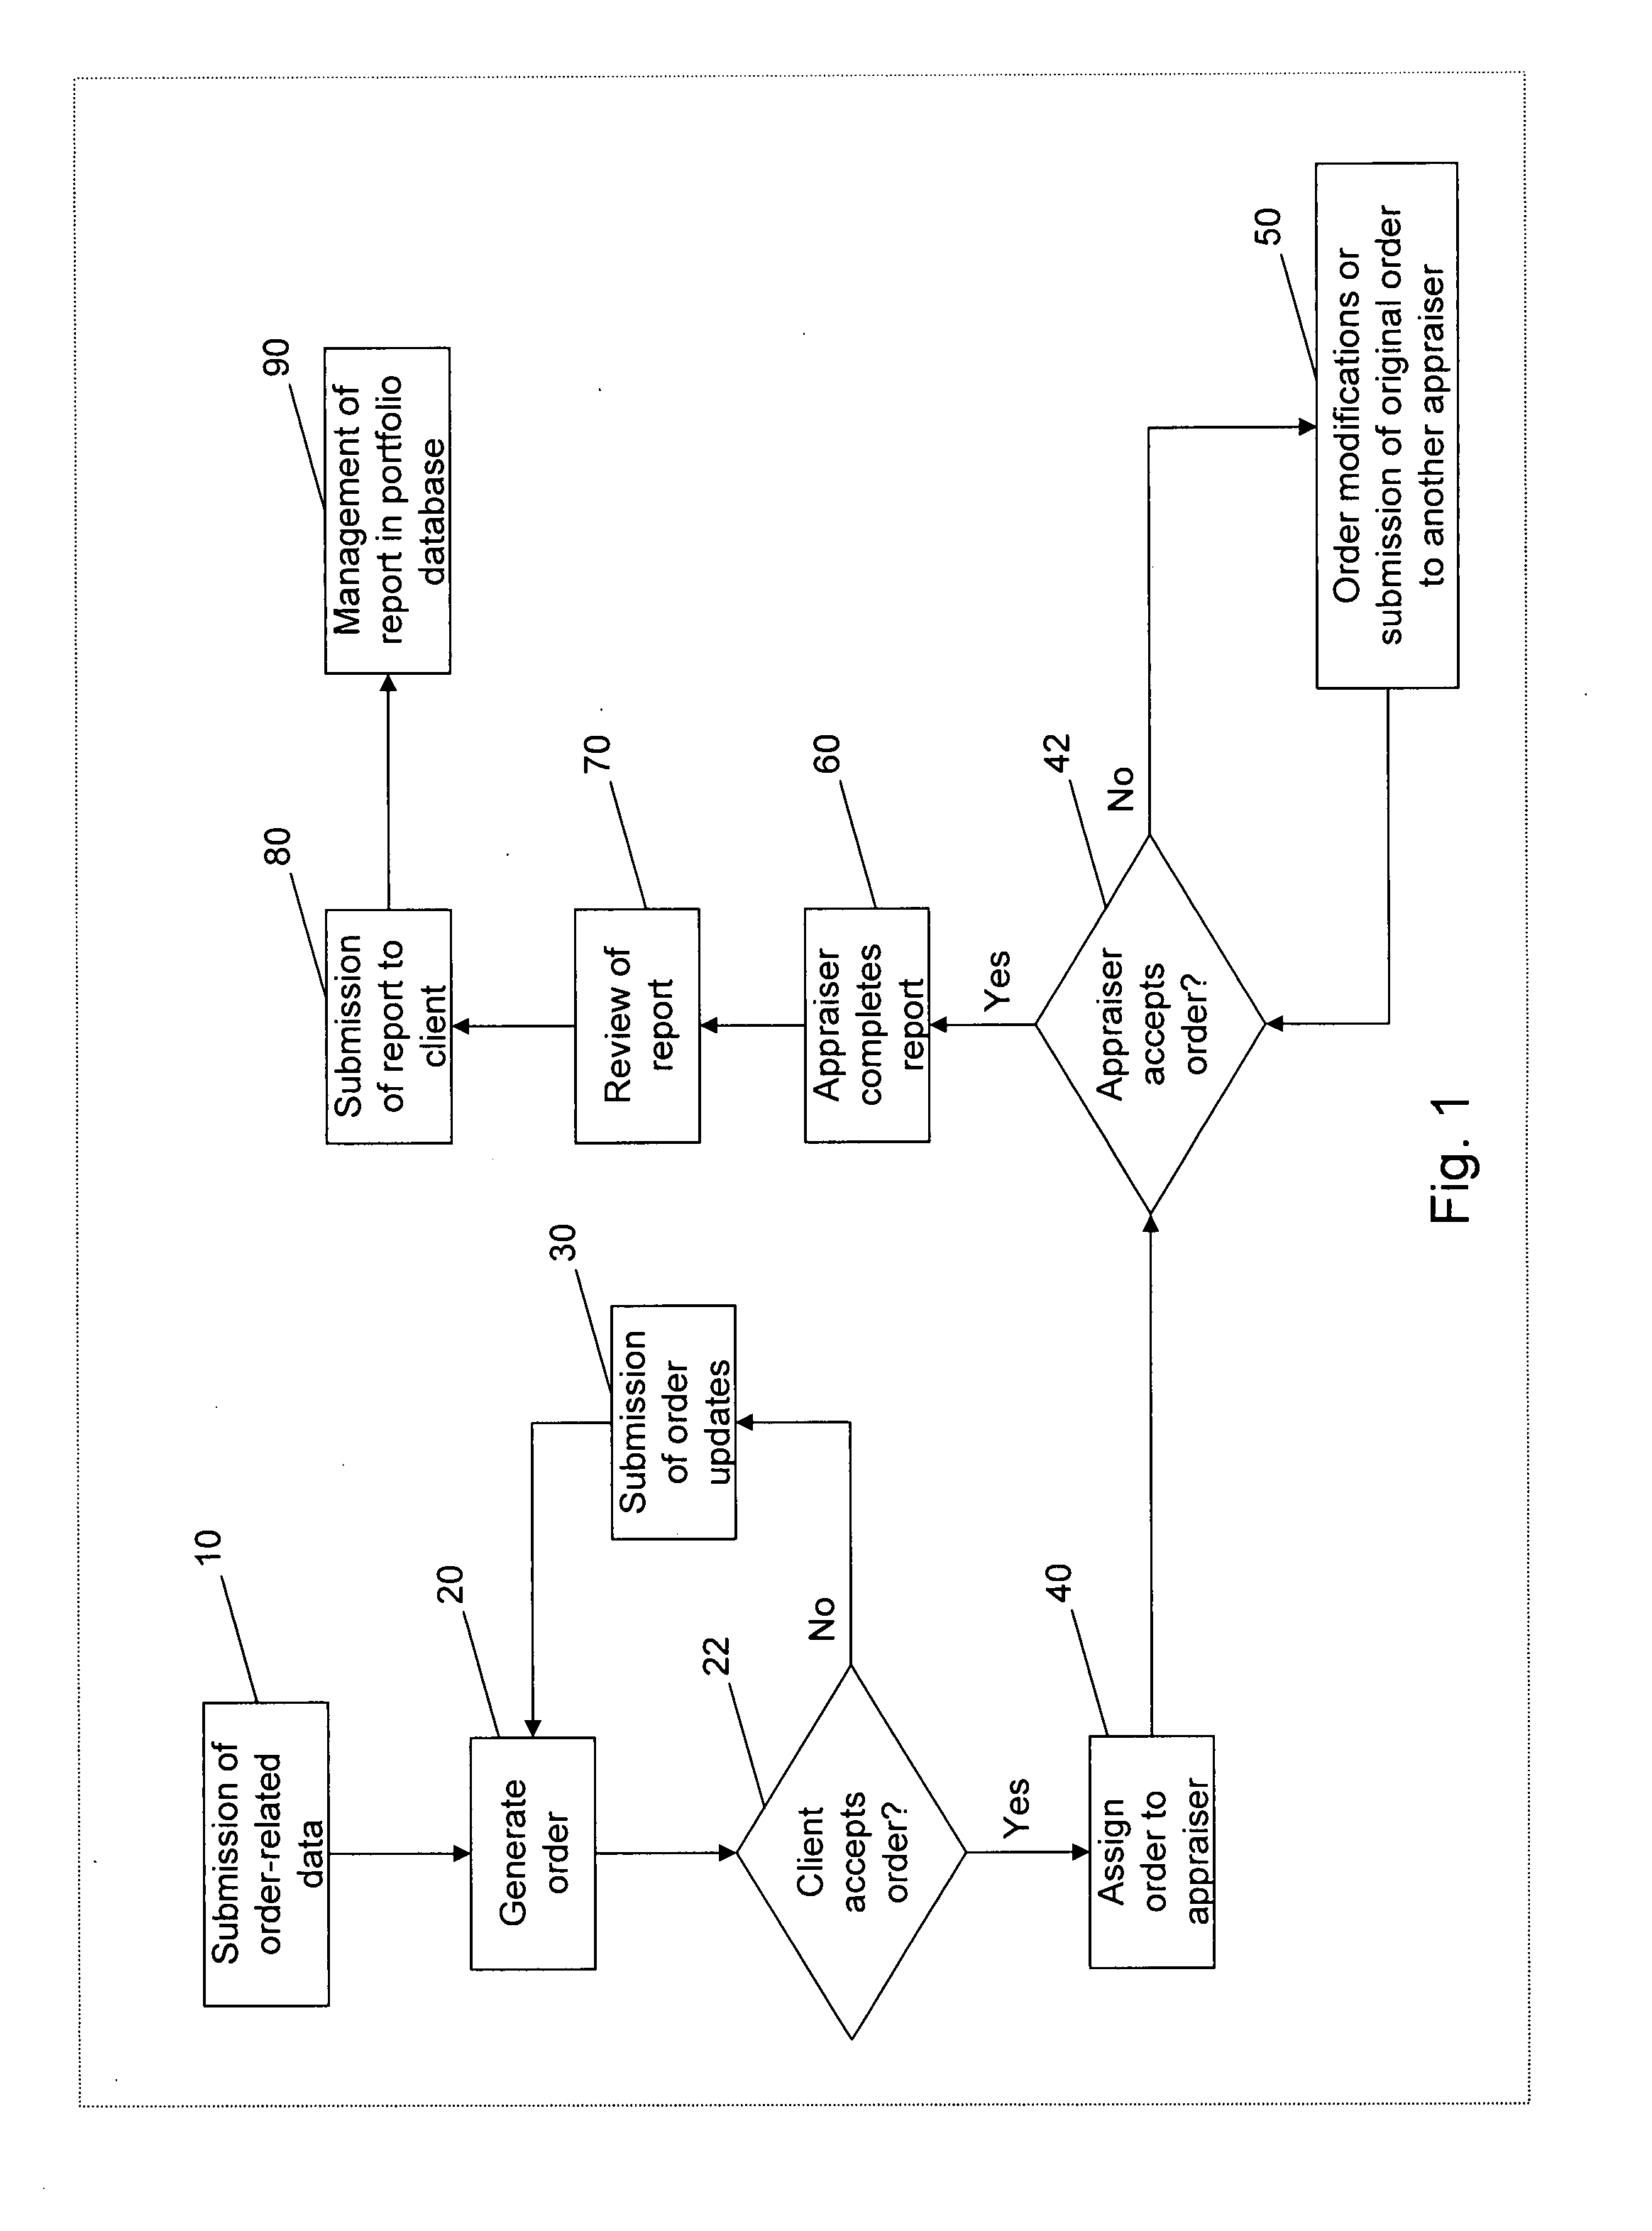 Method for facilitating the ordering, completion and delivery of real estate appraisals